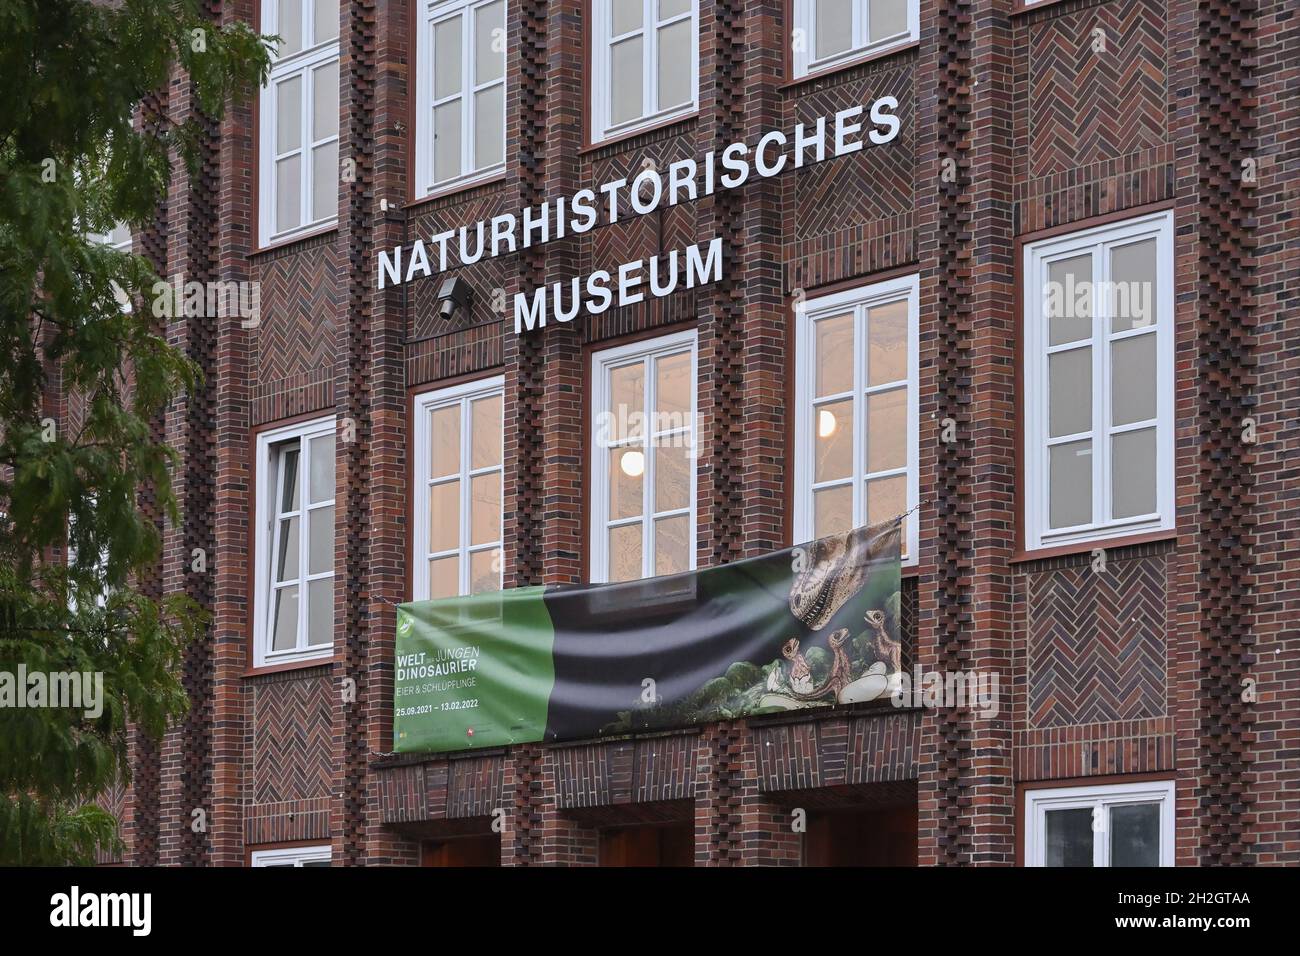 Naturhistorisches Museum Braunschweig, State Natural History Museum in Braunschweig, Germany. Scientific zoology museum, founded in 1754. Stock Photo